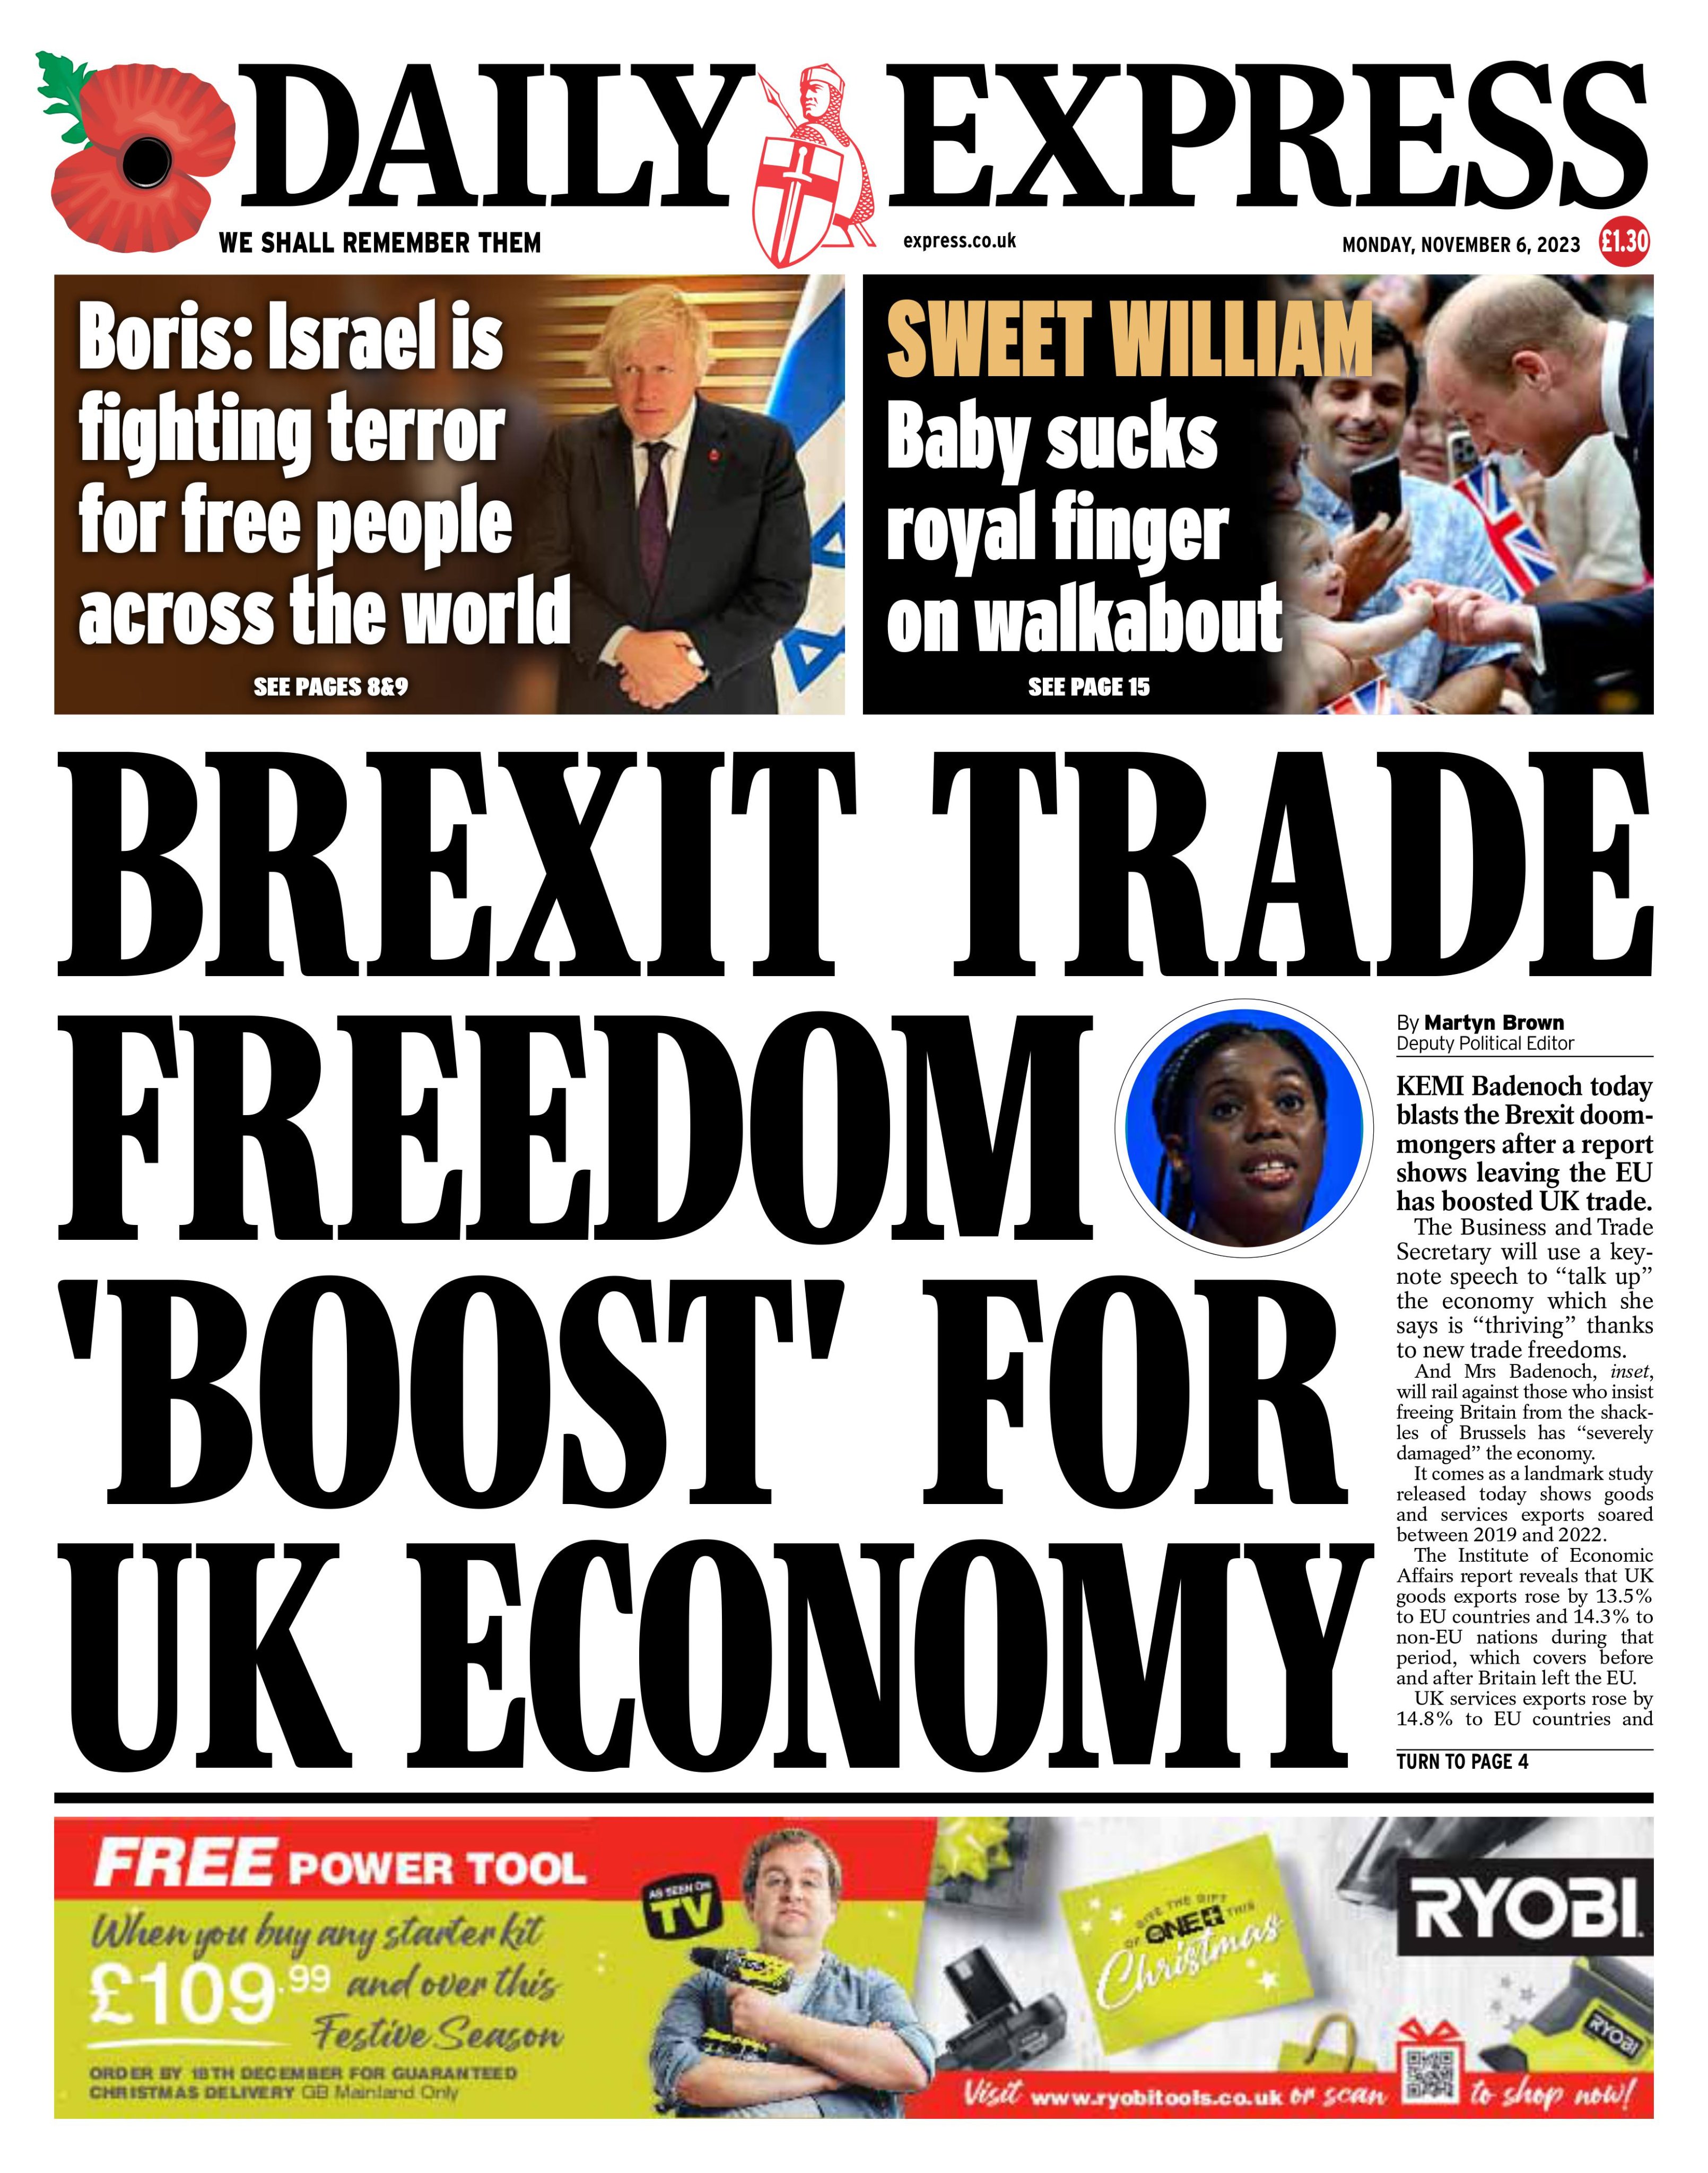 Front page: Brexit trade freedom 'boost' for UK economy #tomorrowspapertoday